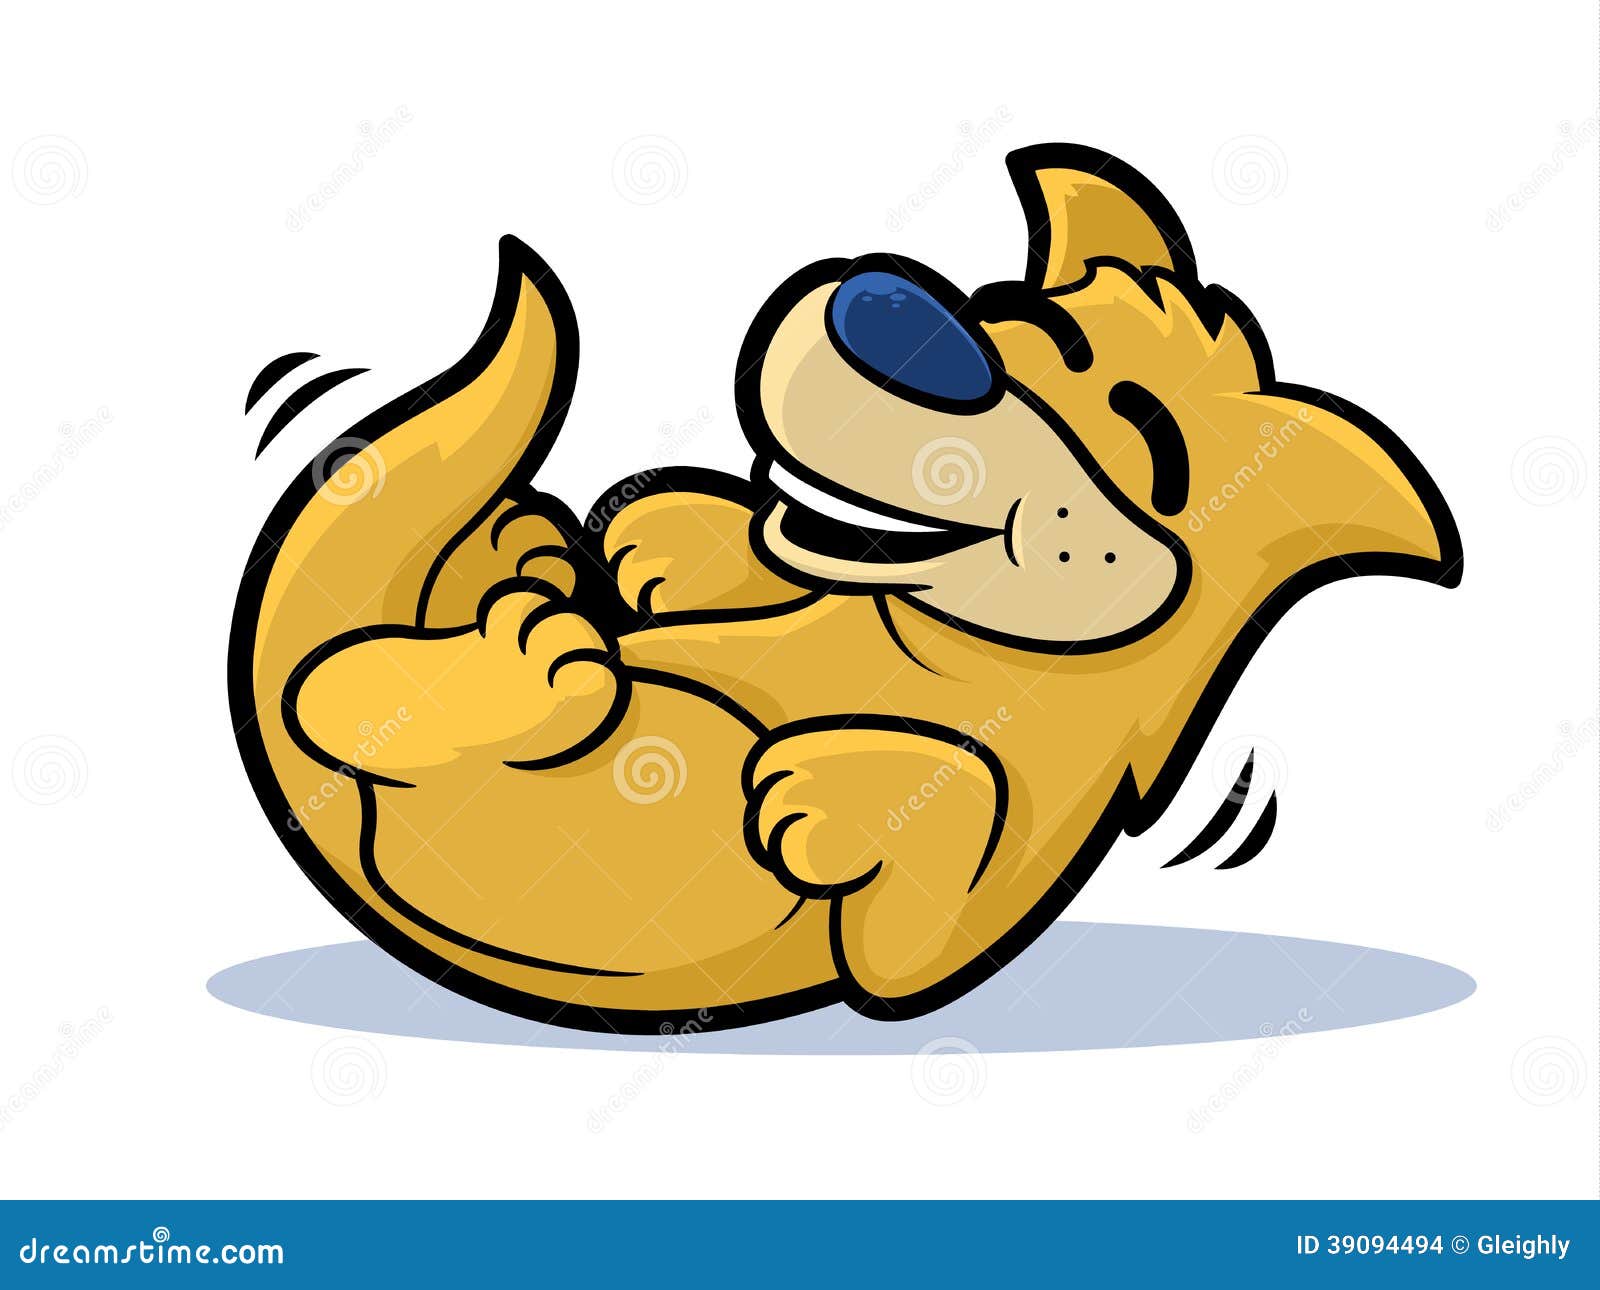 clipart laughter cartoon - photo #12